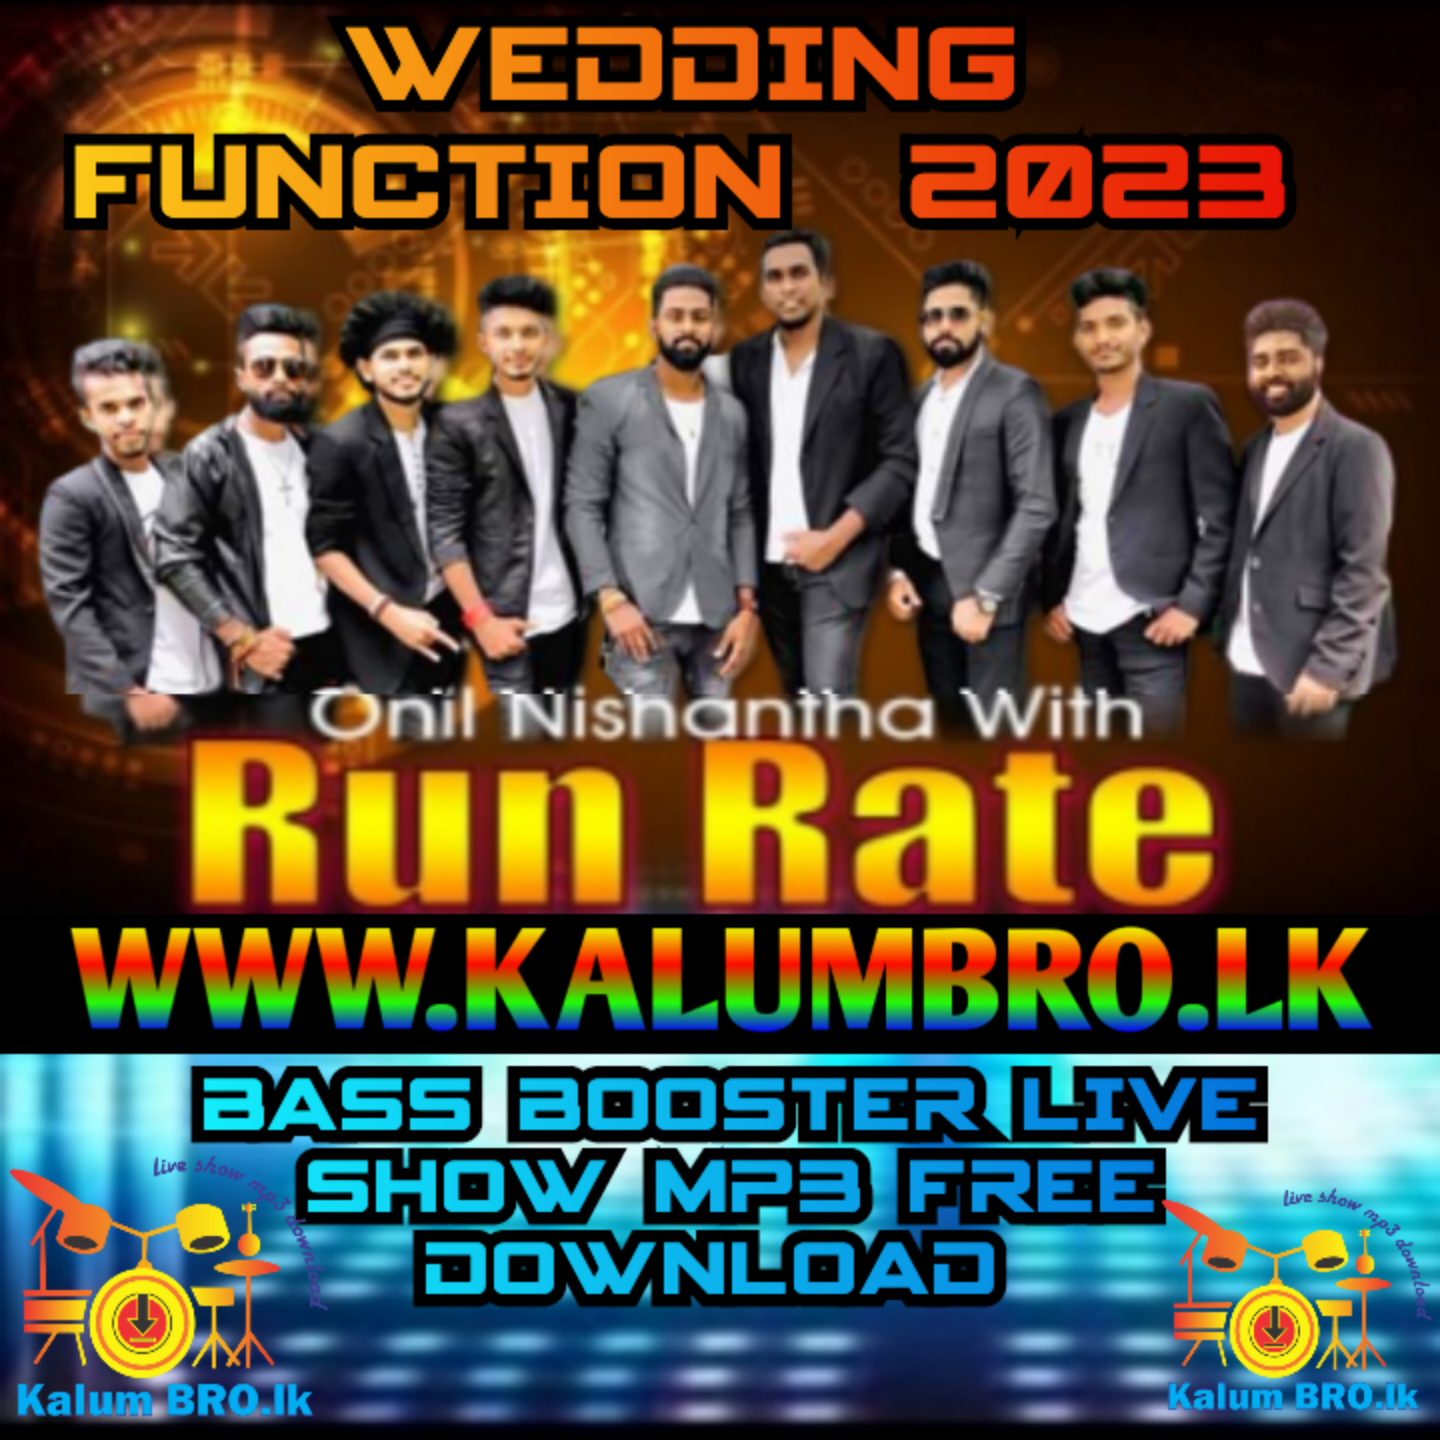 GAMPAHA RUN RATE LIVE IN WEDDING FUNCTION 2023